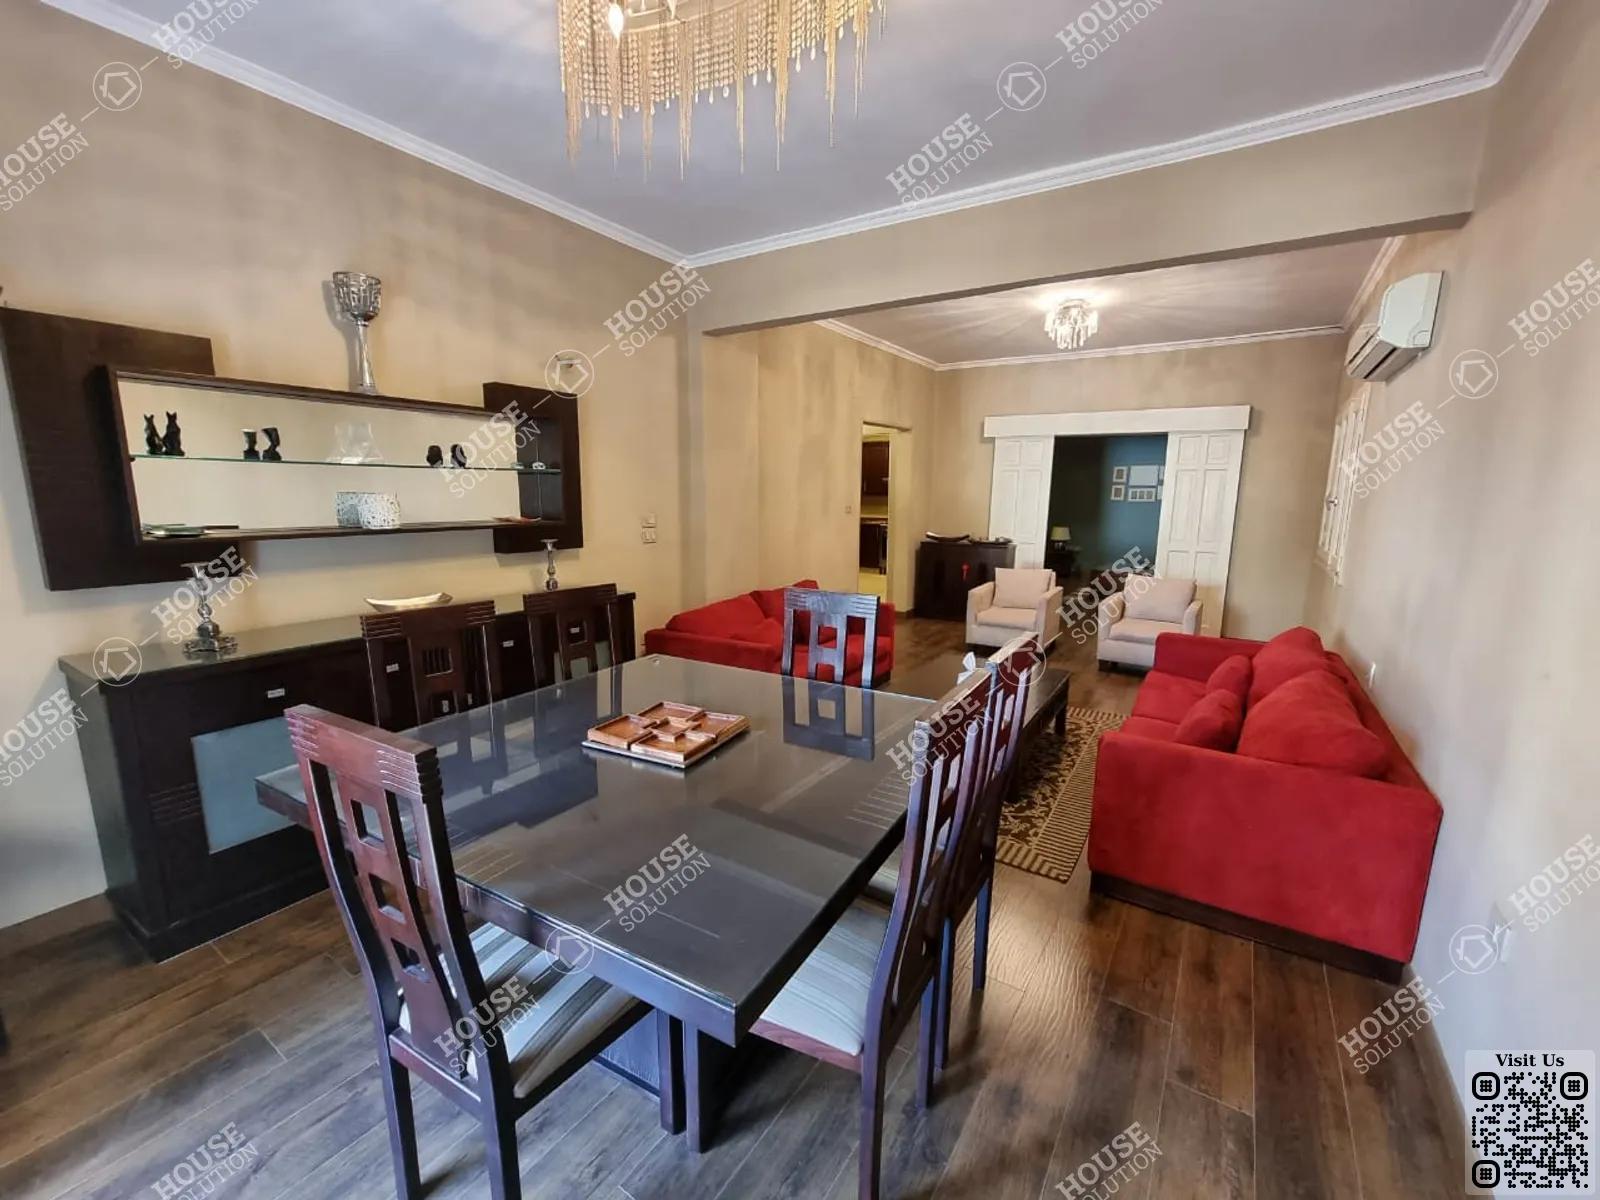 RECEPTION  @ Apartments For Rent In Maadi Maadi Sarayat Area: 140 m² consists of 2 Bedrooms 2 Bathrooms Modern furnished 5 stars #3721-0